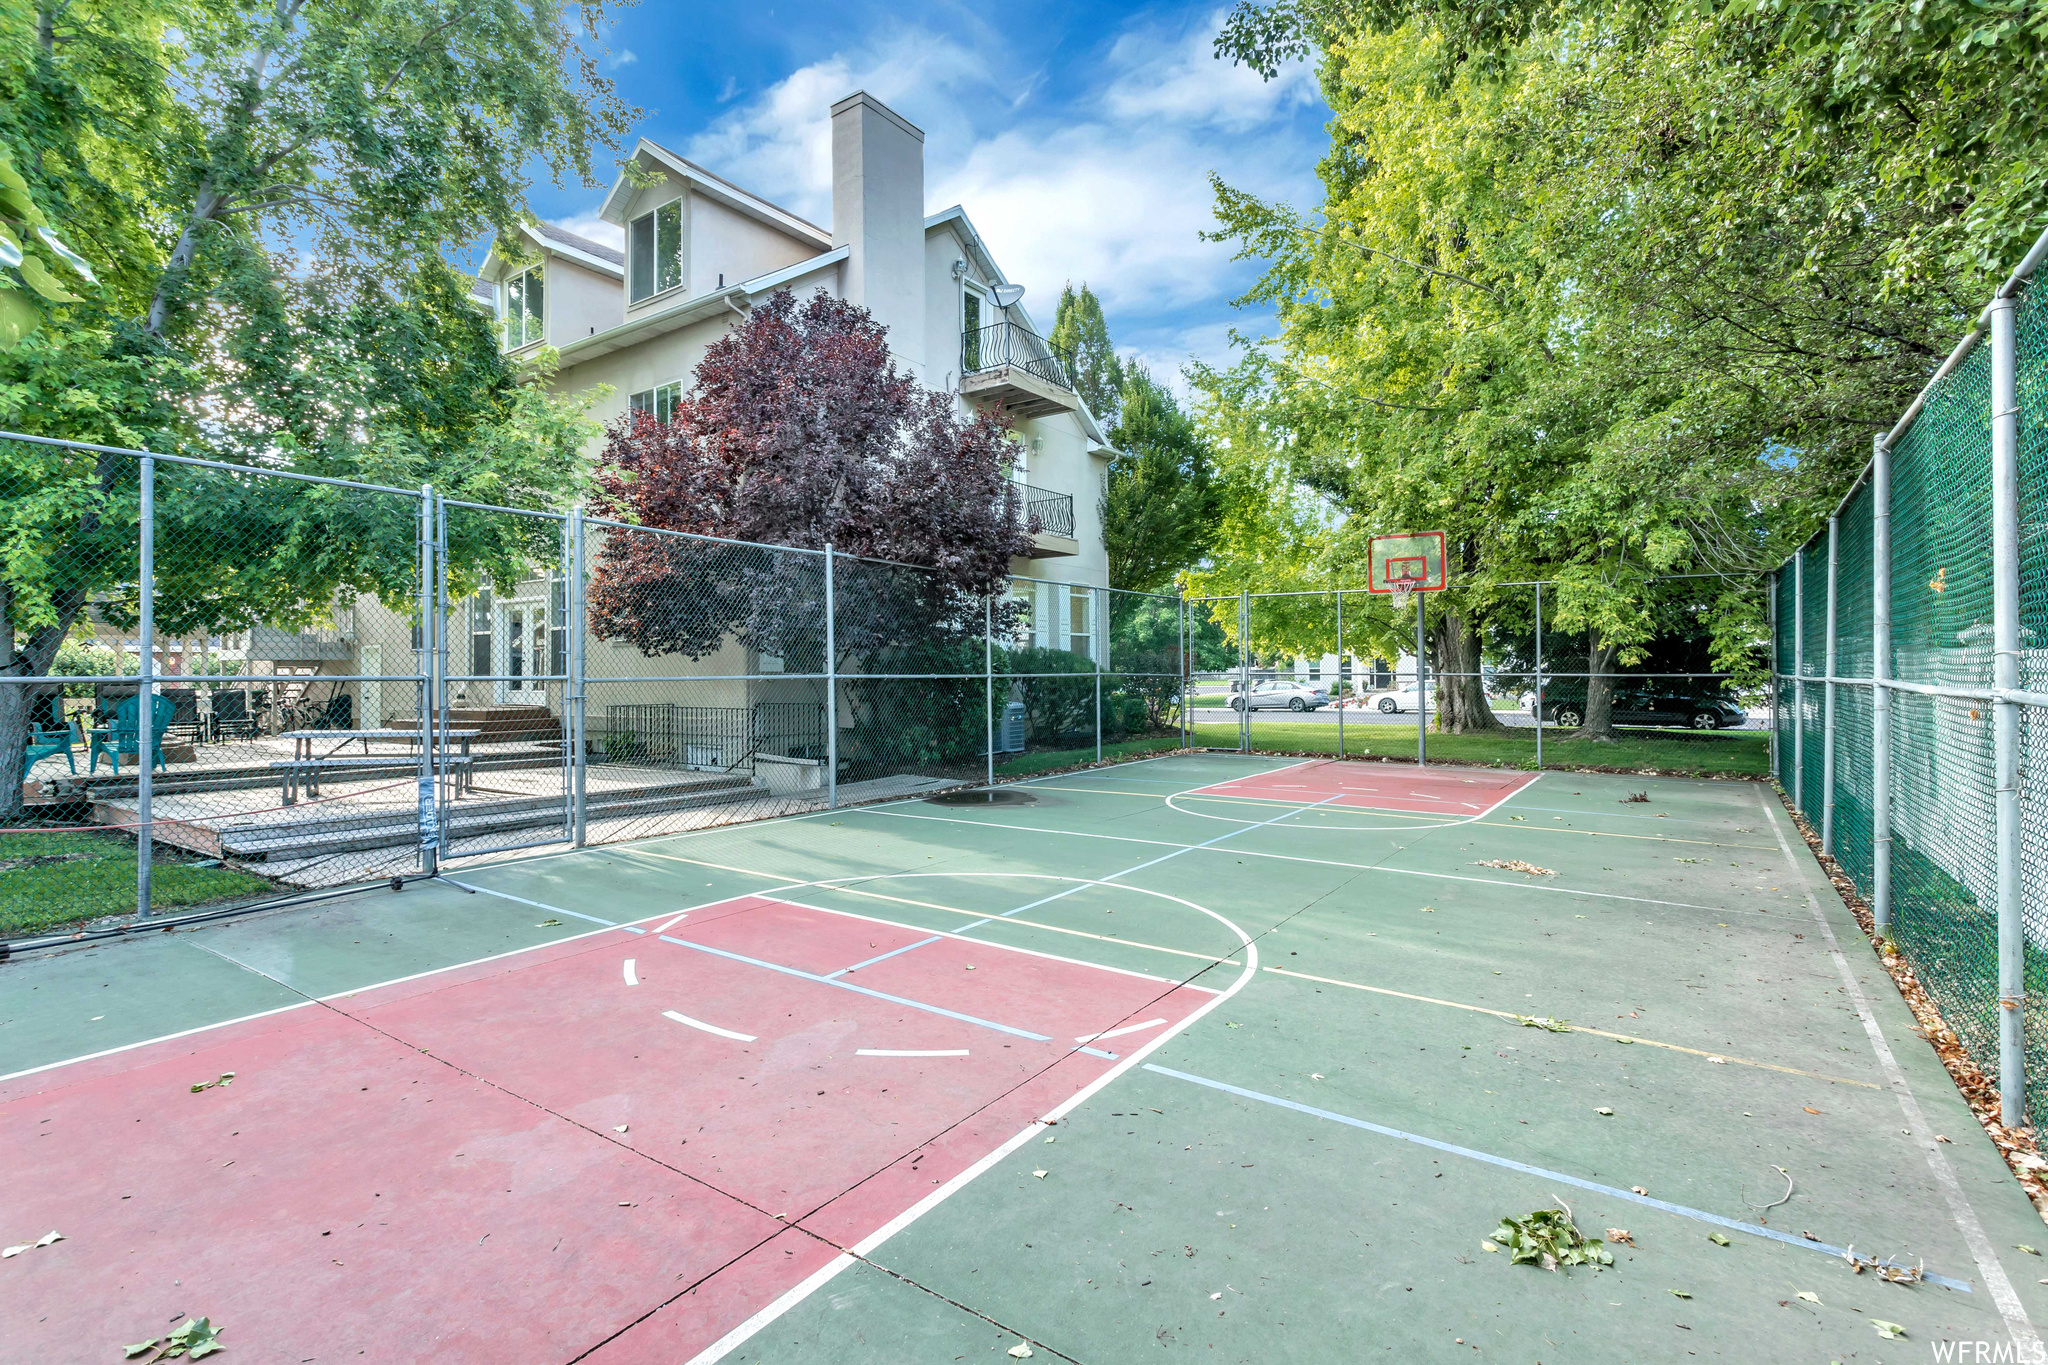 View of basketball court